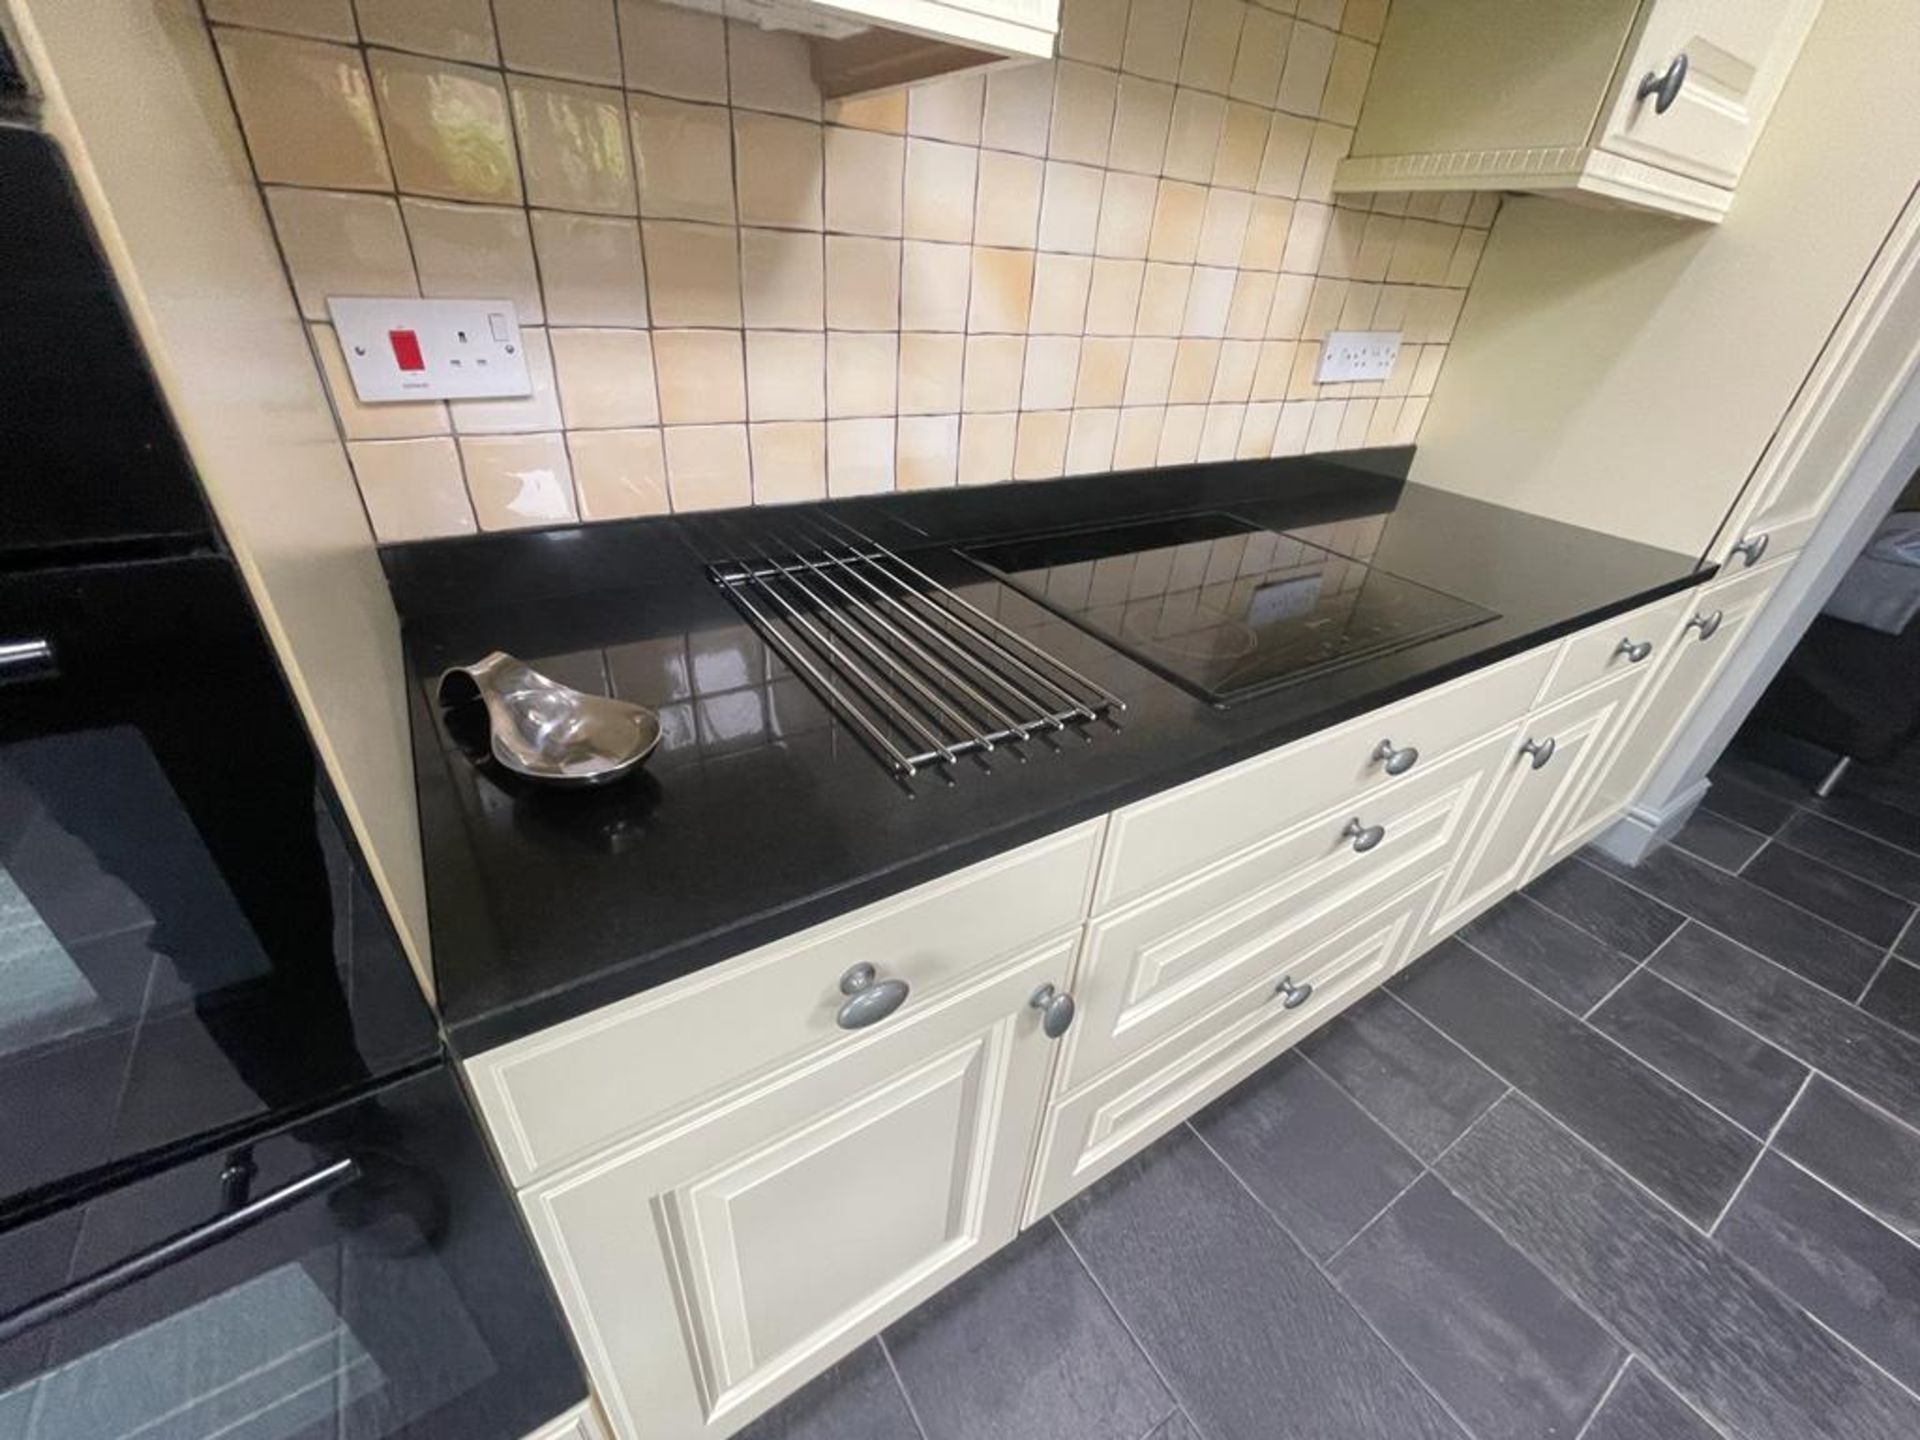 1 x Bespoke Keller Kitchen With Branded Appliances - From An Exclusive Property - Image 28 of 127